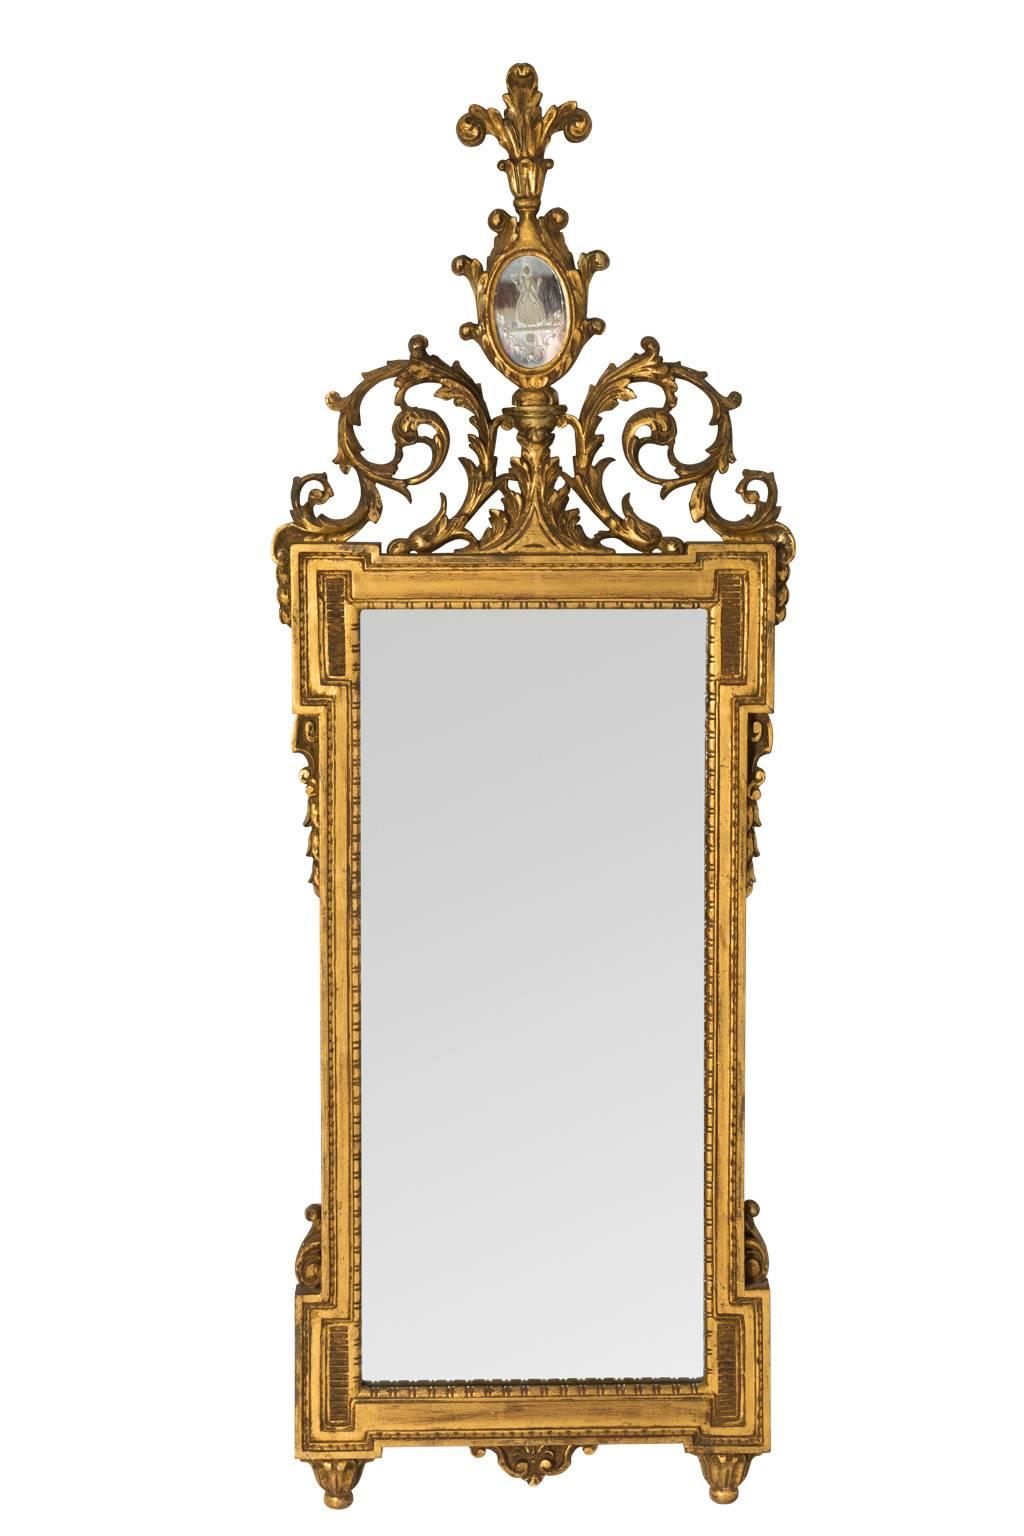 Pair of neoclassical gilded mirrors with dog ear corners, circa 19th century. The crown features scrolled foliage and an etched glass medallion.
 